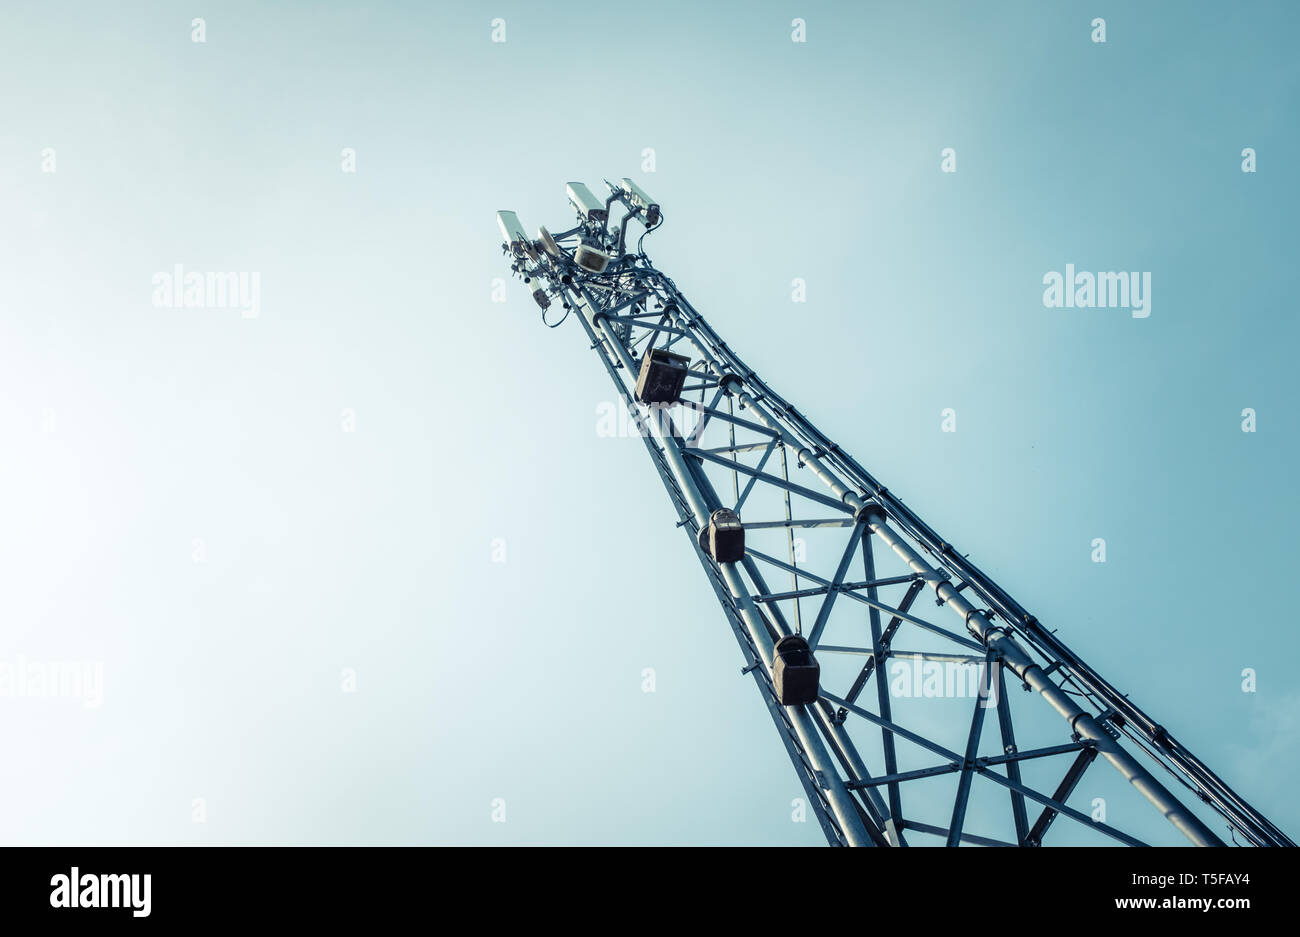 A Telecommunications, Cellphone Or Mobile Phone Tower With Copy Space Stock Photo